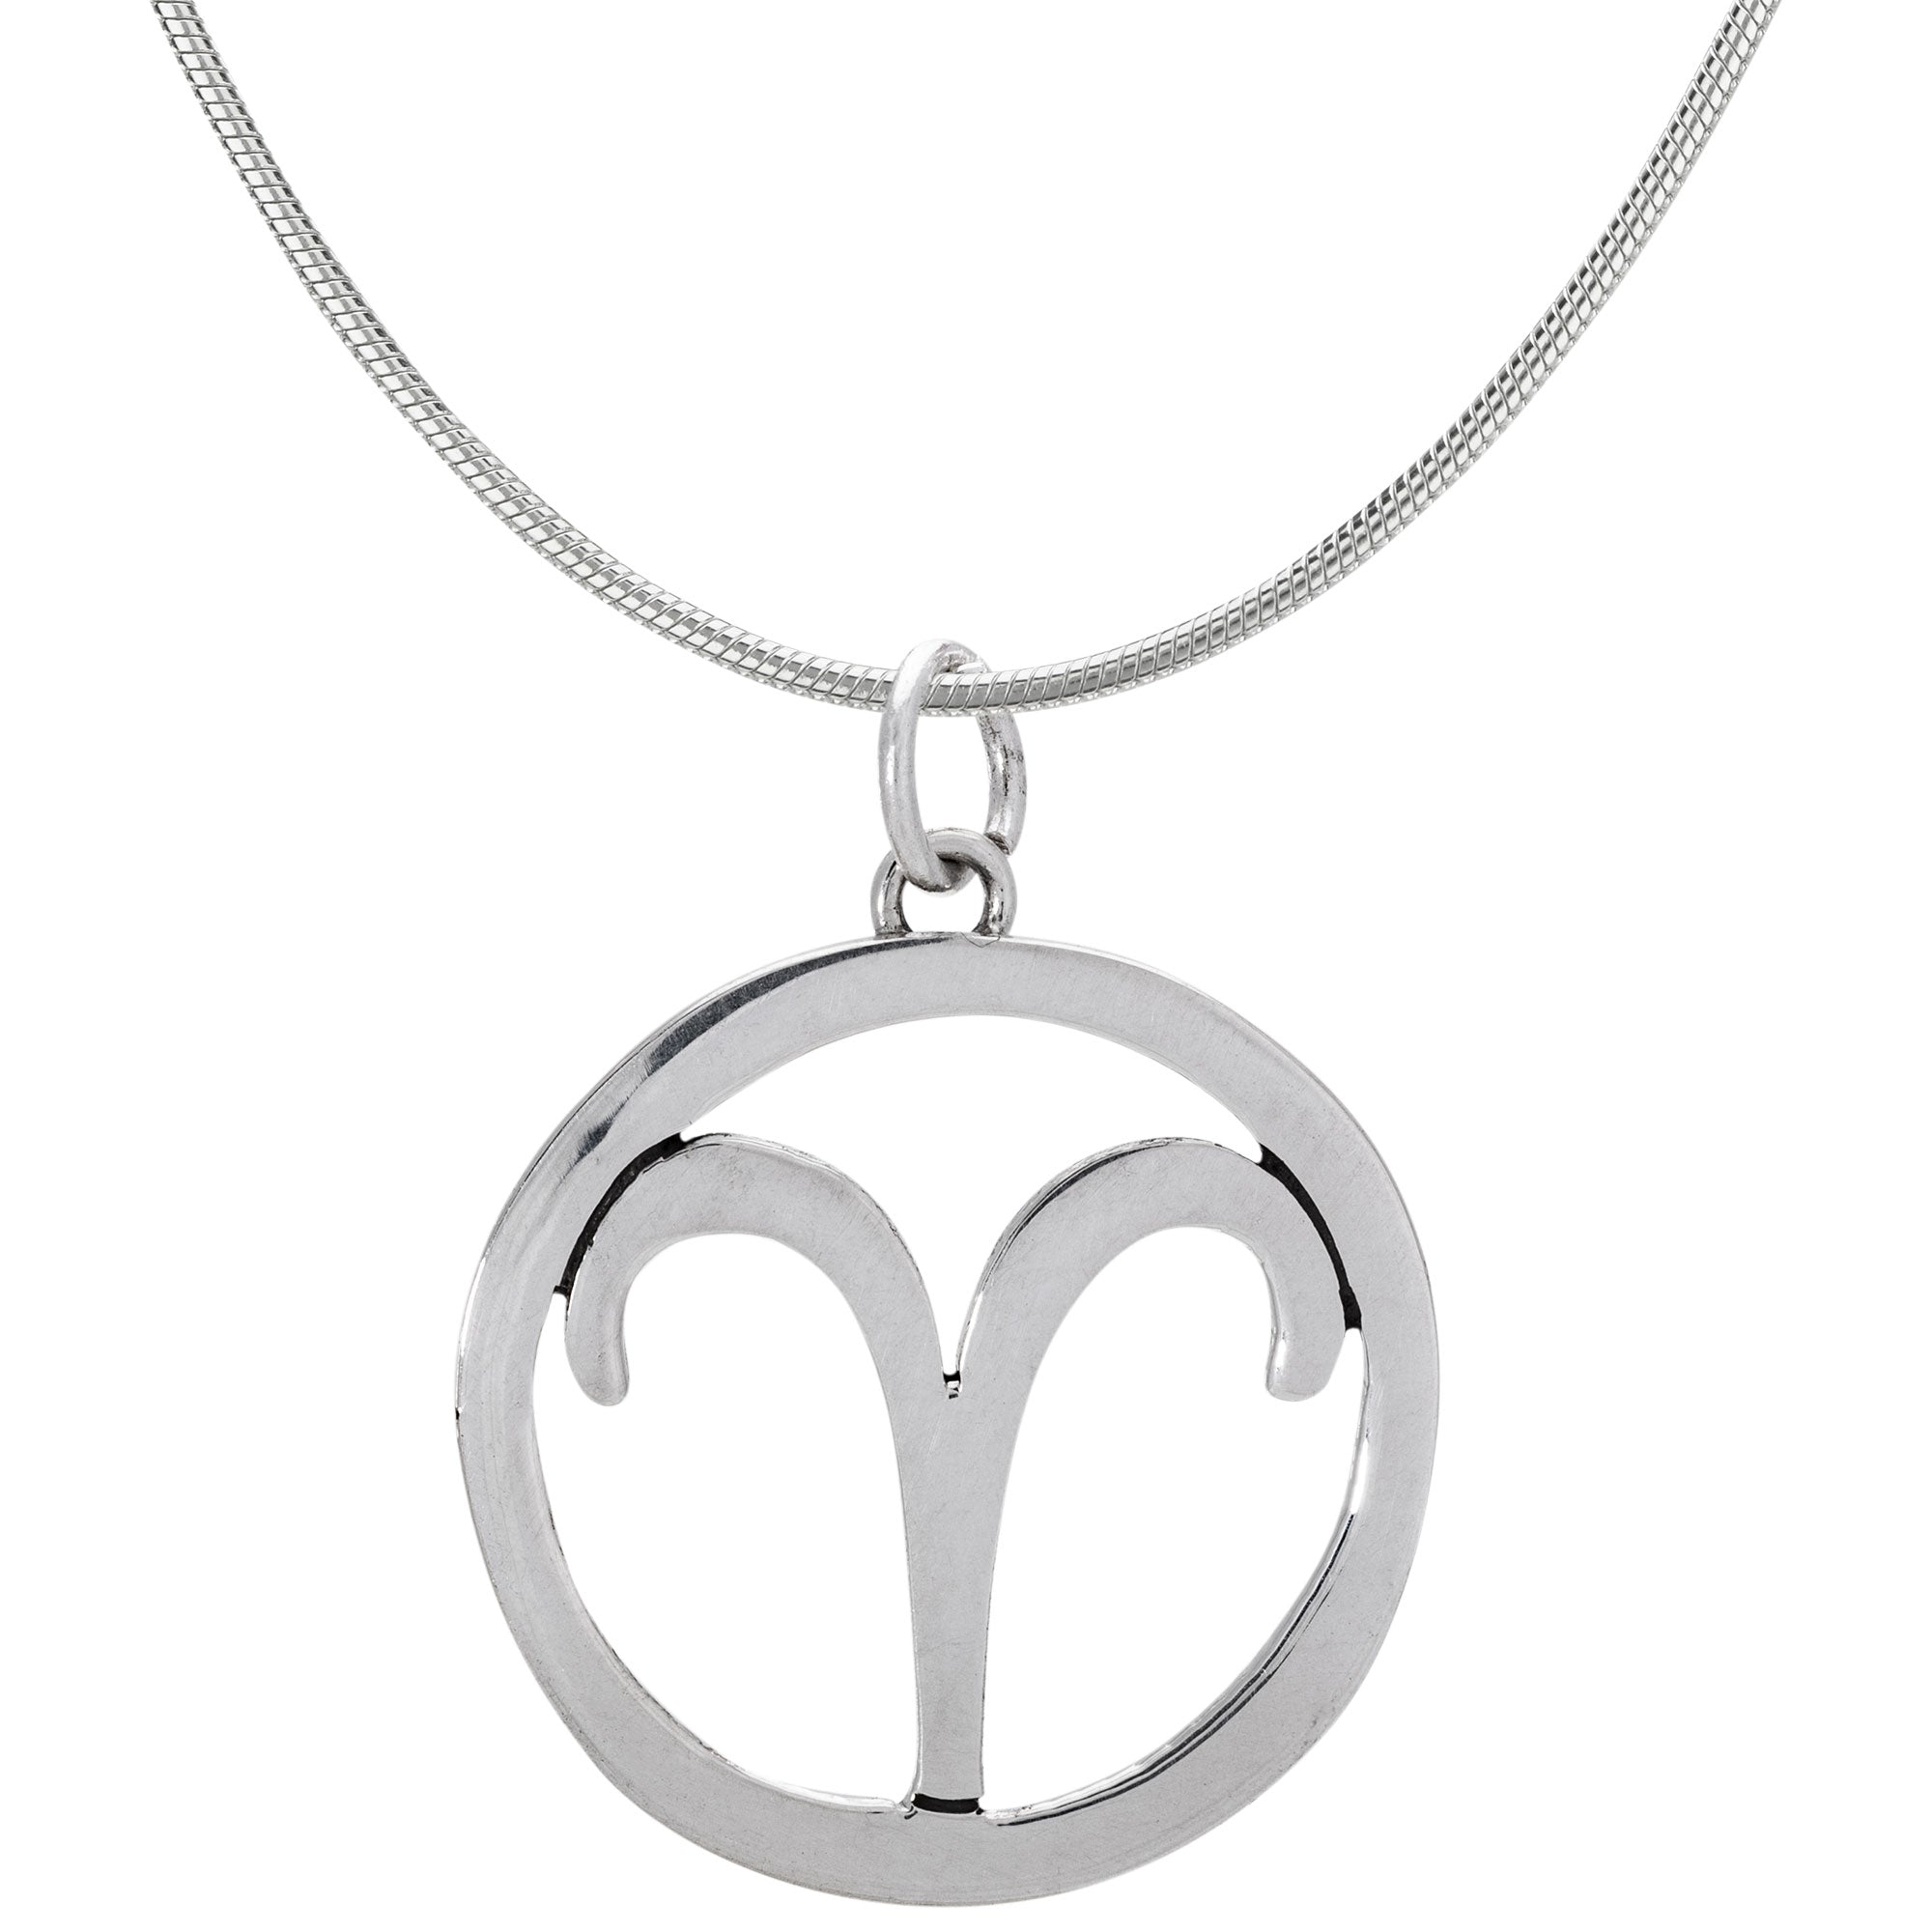 Zodiac Sign Astrology Necklace Collection - Virgo - With Diamond Cut Chain